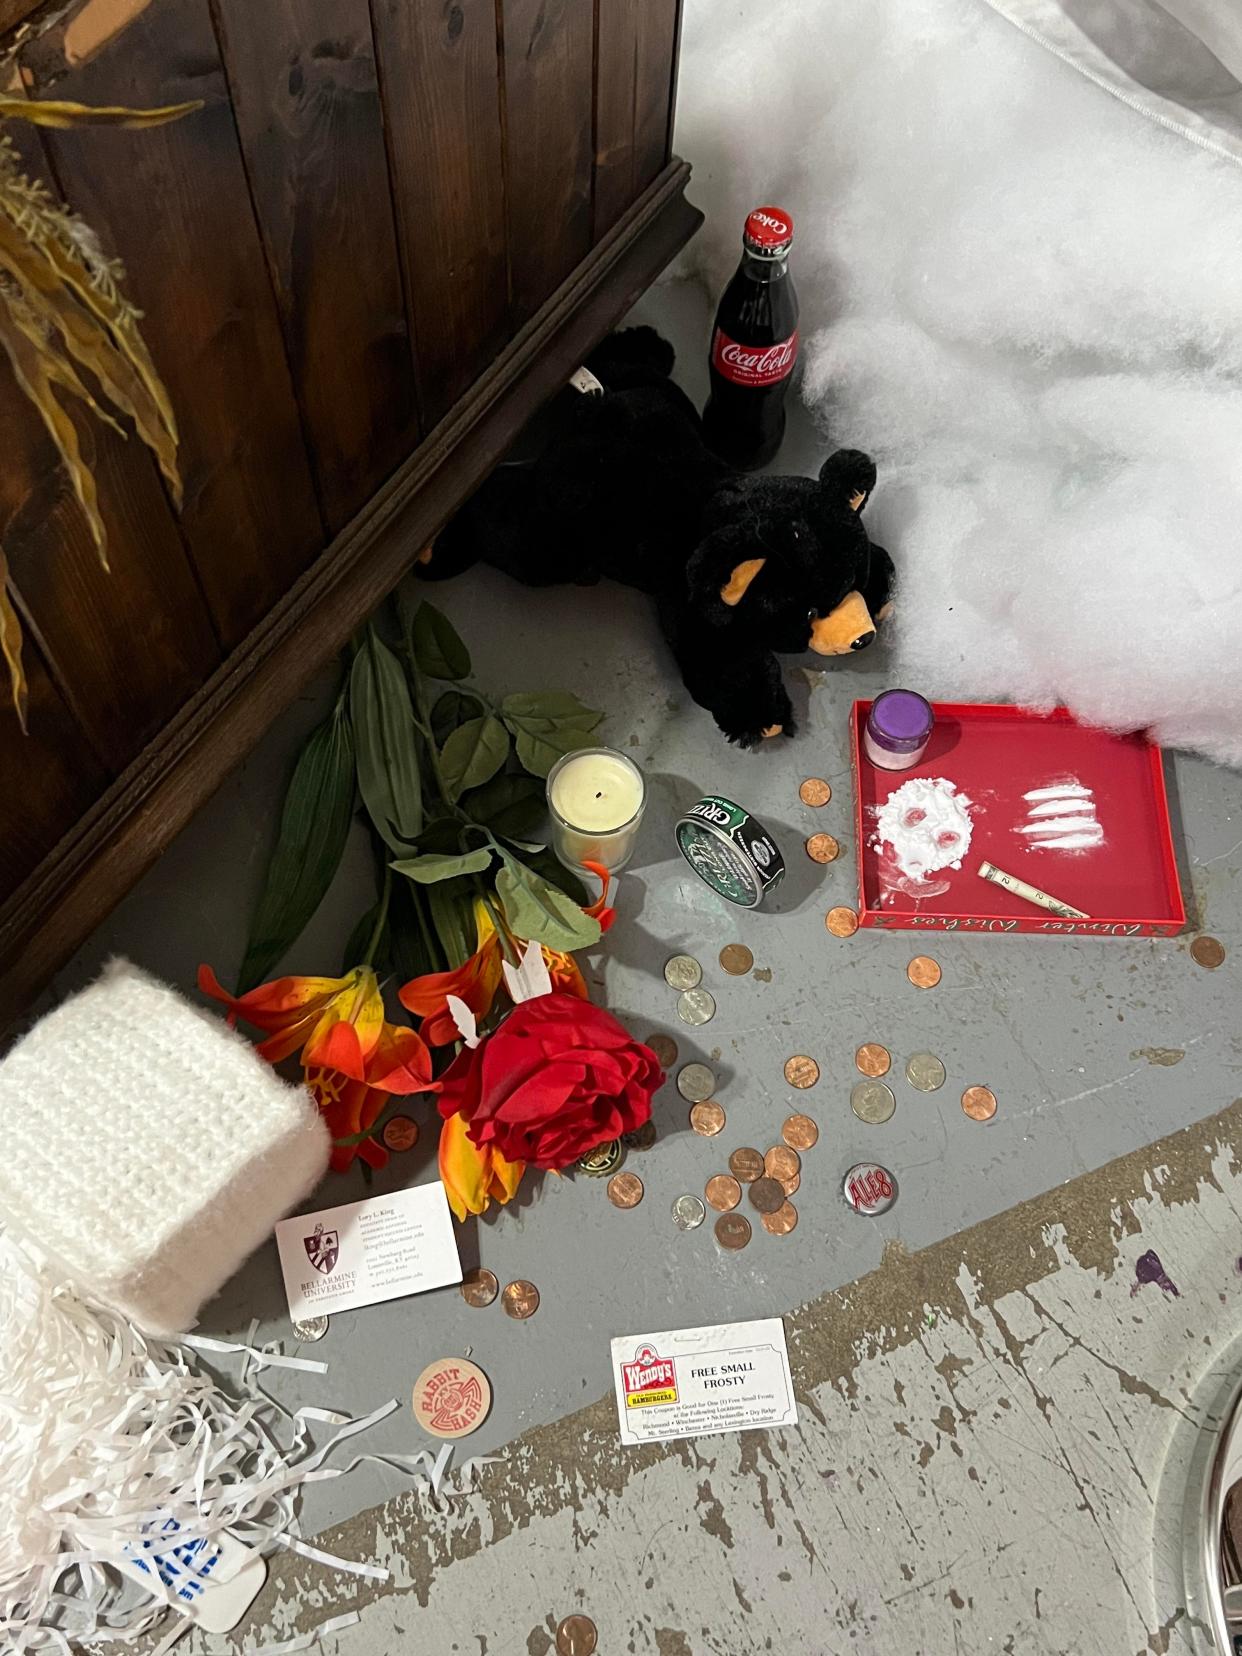 Trinkets — including a stuffed bear, knitted cocaine and fake lines of the drug — line the floor at the base of a taxidermed bear in Kentucky. There's also change, flowers, and a candle. (Courtesy of Courtney Oldendorf)